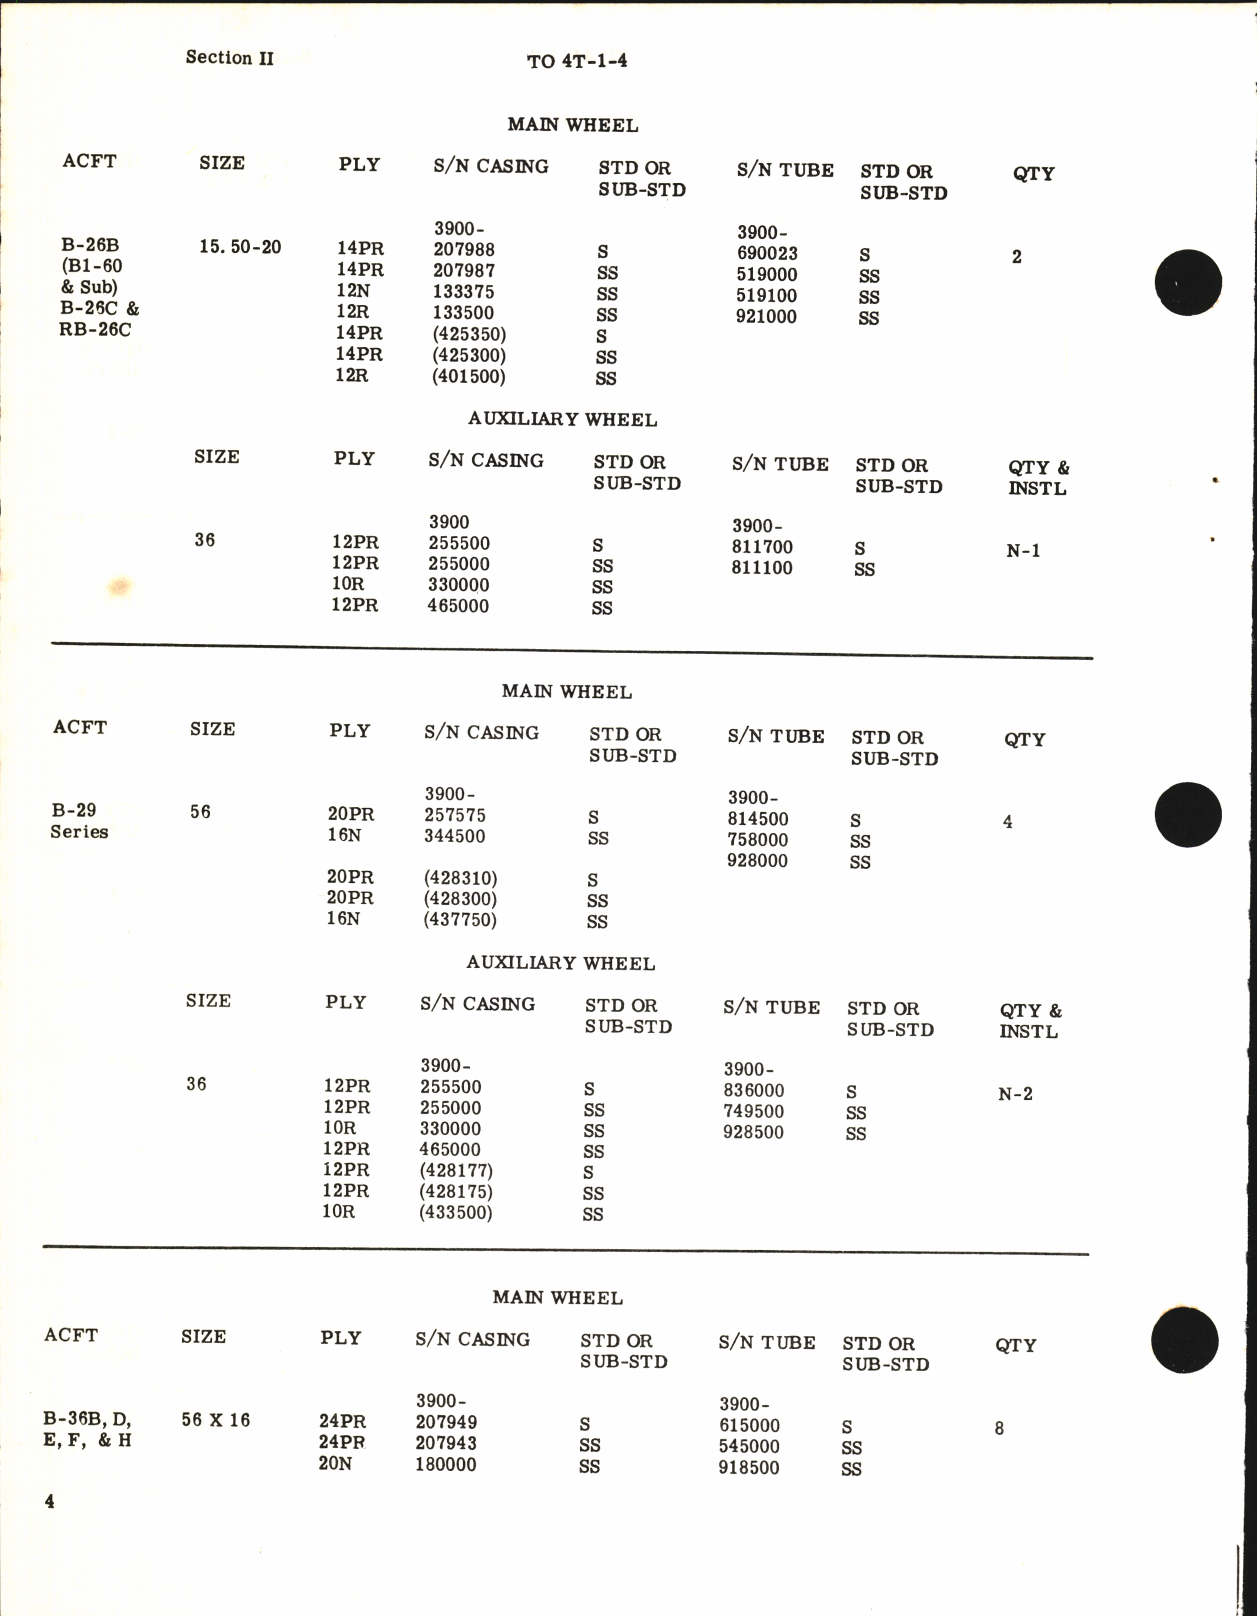 Sample page 6 from AirCorps Library document: Application Table for Aircraft Tire Casings and Tubes